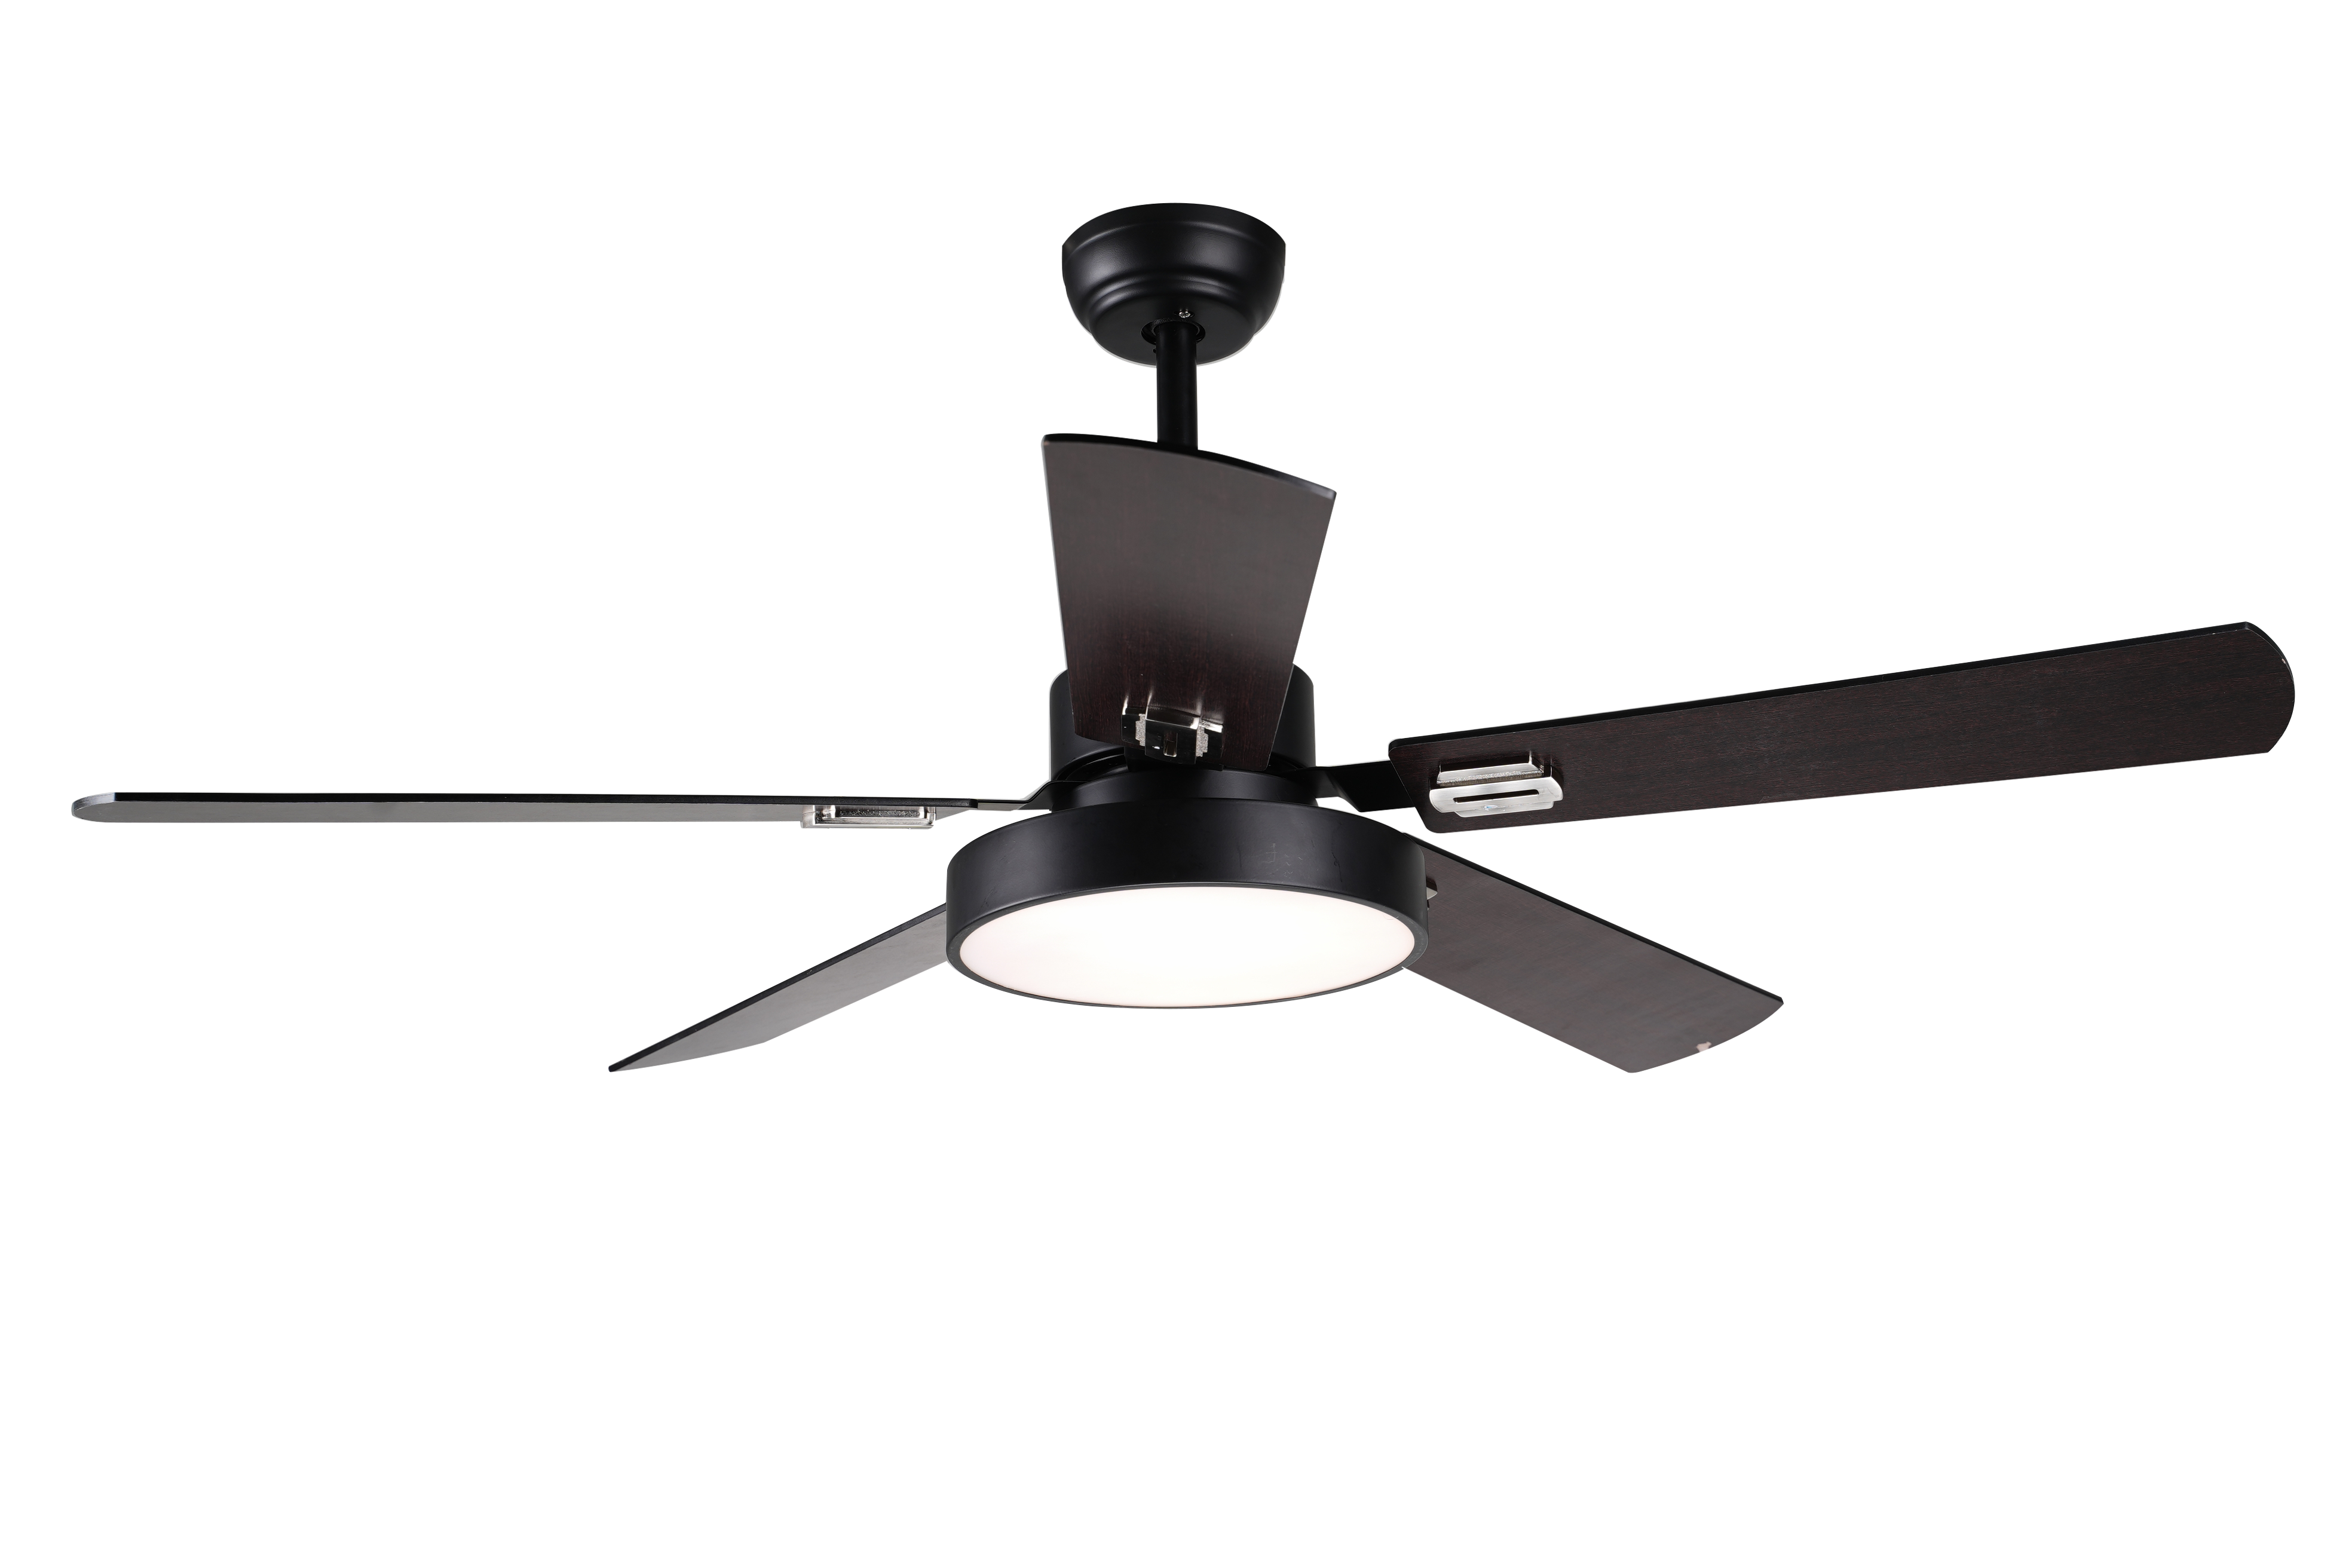 AirBena High Quality 52'' DC Motor Energy Saving 5 Plywood Blades Ceiling Fan with Remote Control